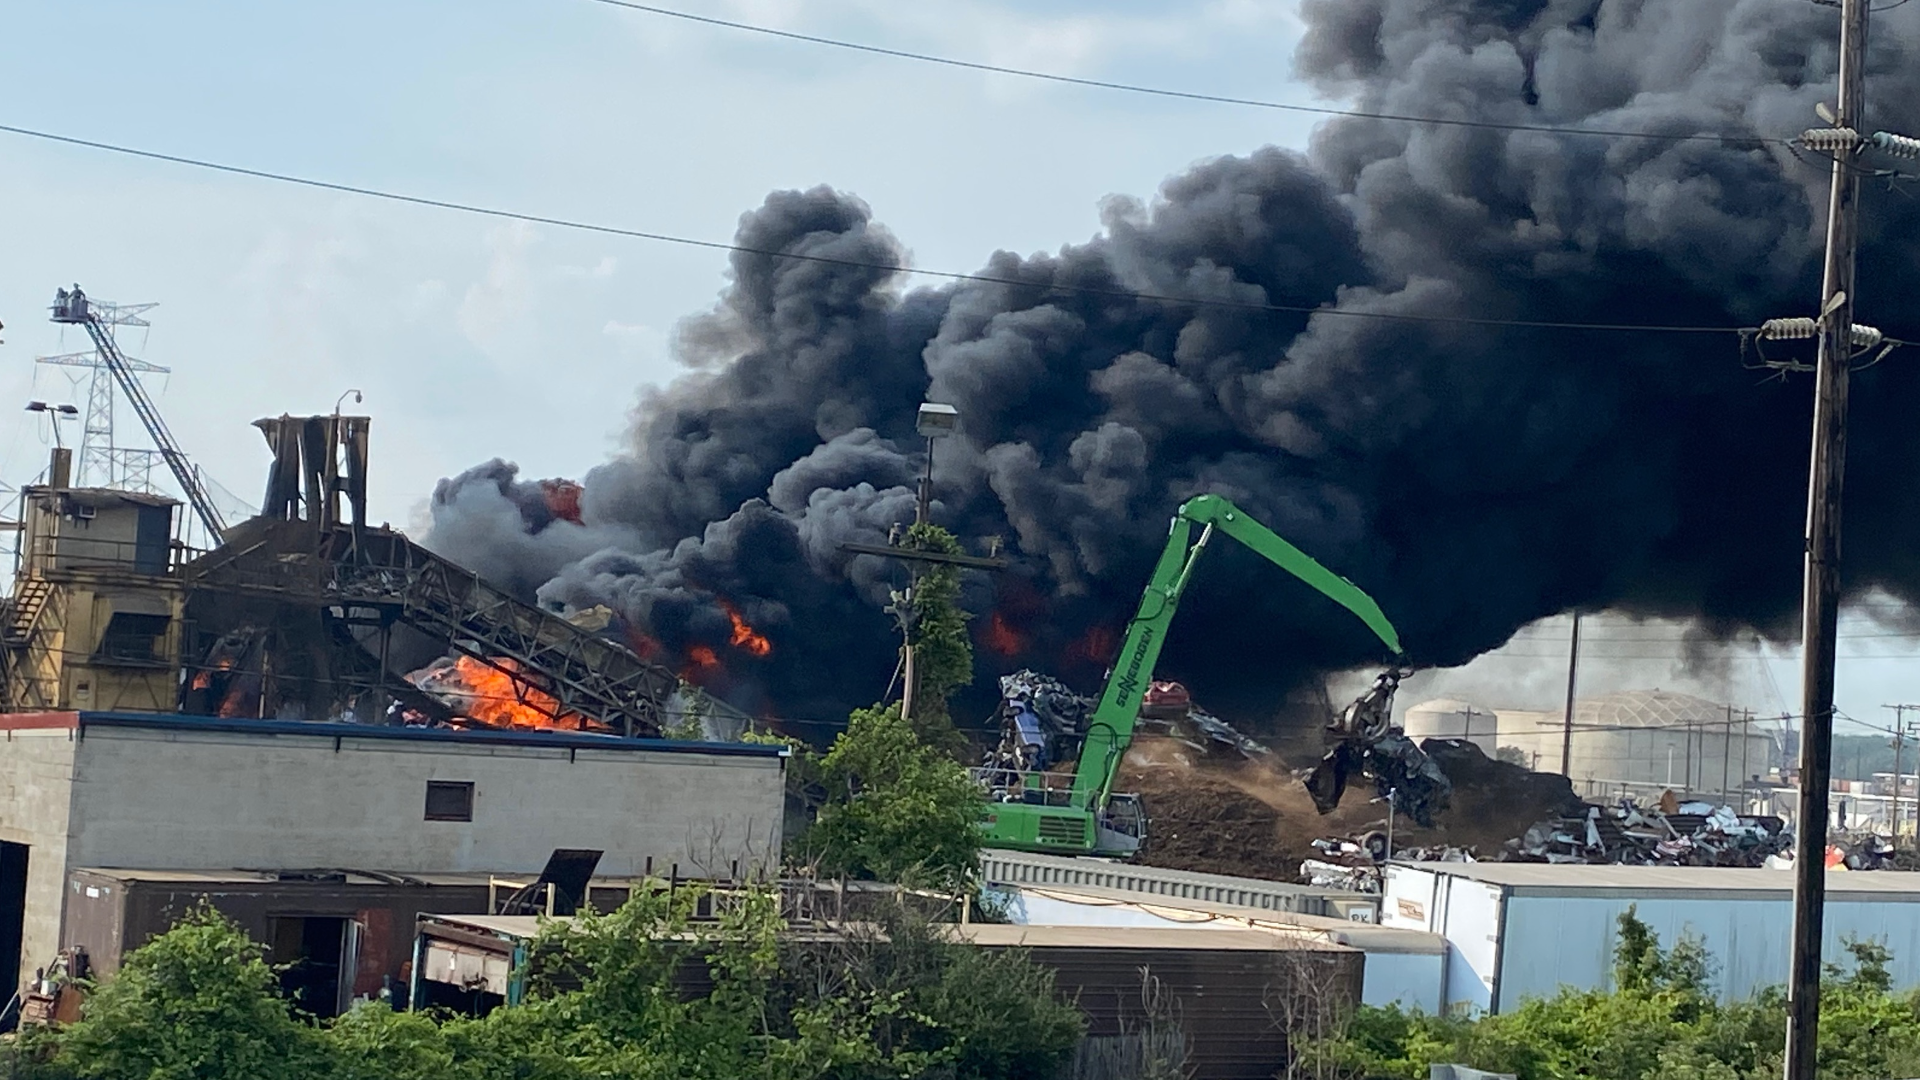 A large area of shredded cars and scrap metal is burning, according to TFRD. Environmental services and EPA are on scene as crews begin to get flames under control.